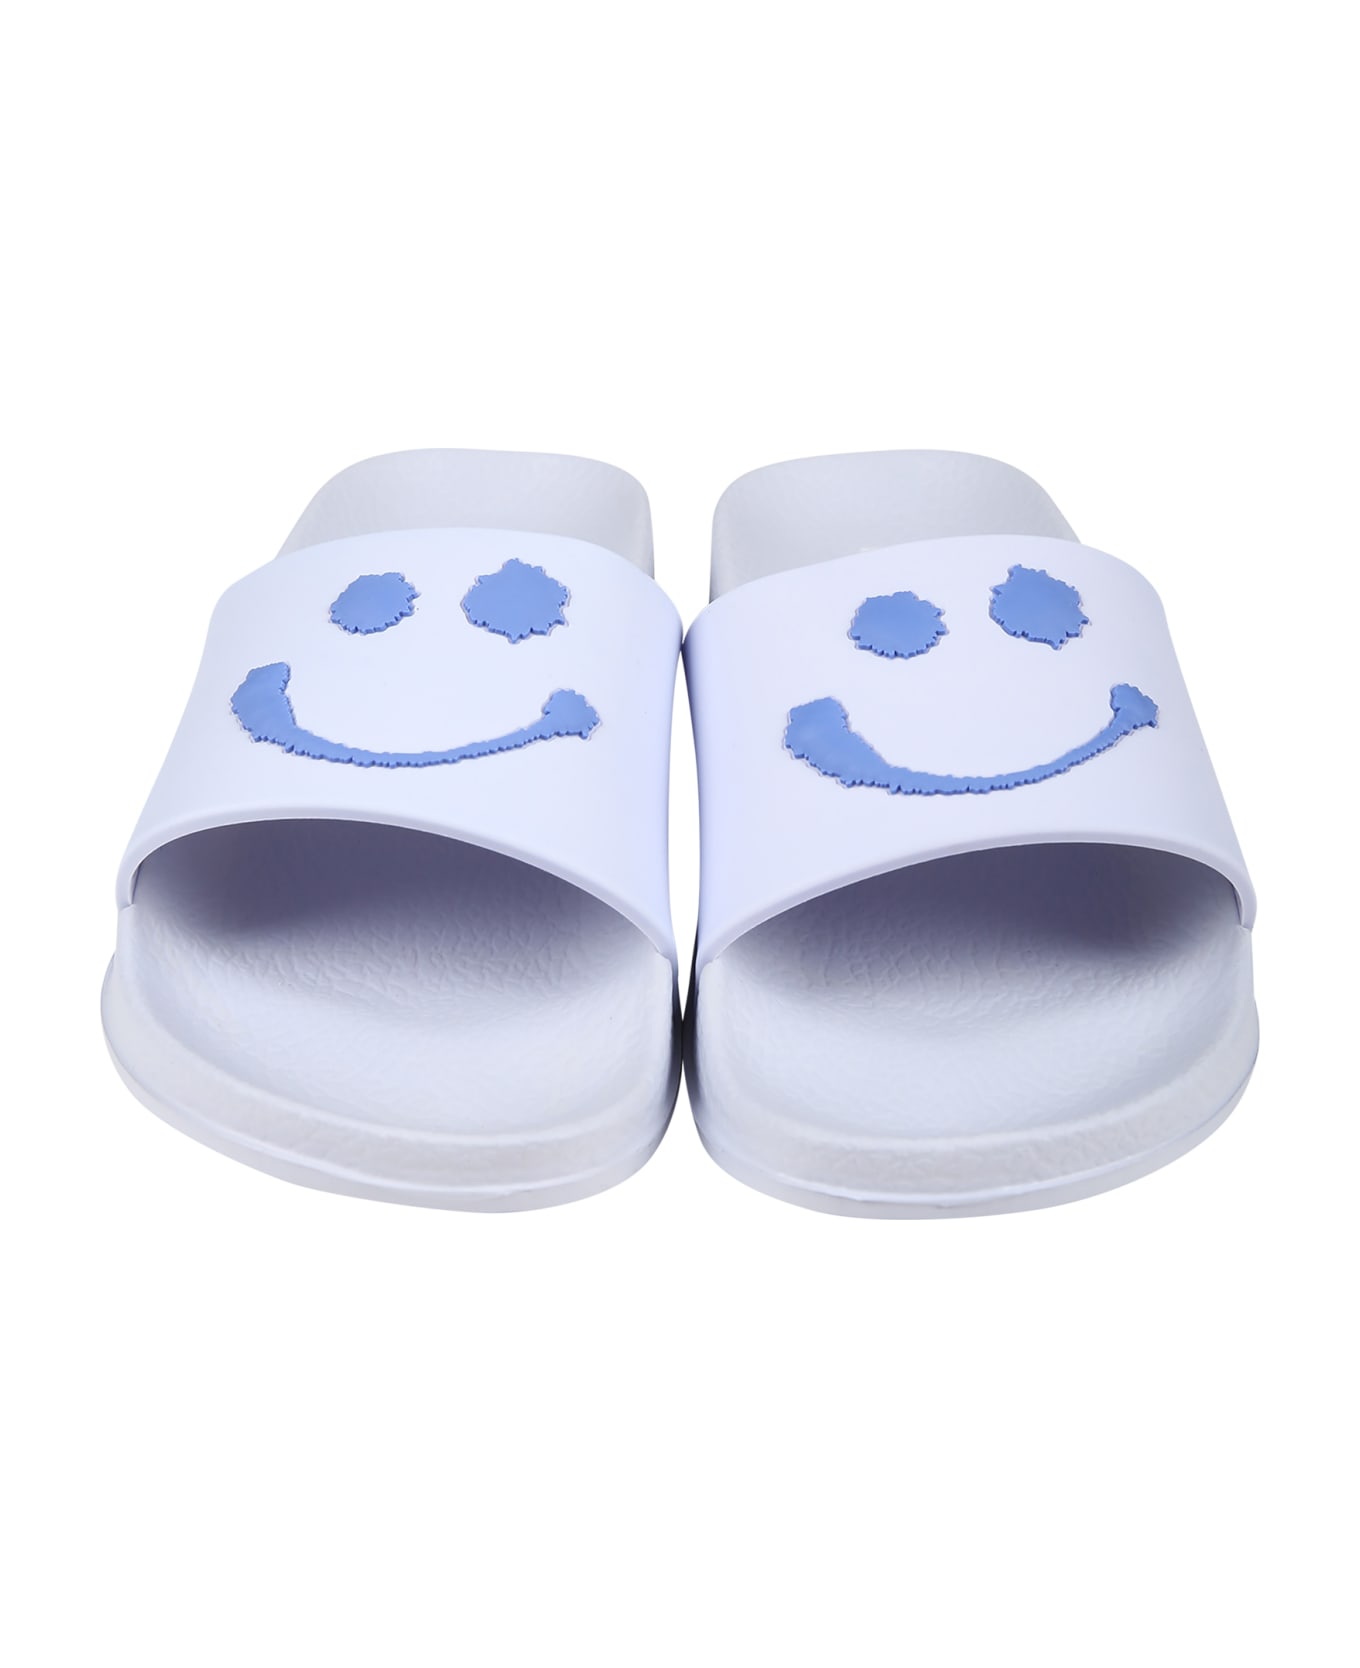 Molo Light Blue Slippers For Kids With Smiley - Light Blue シューズ